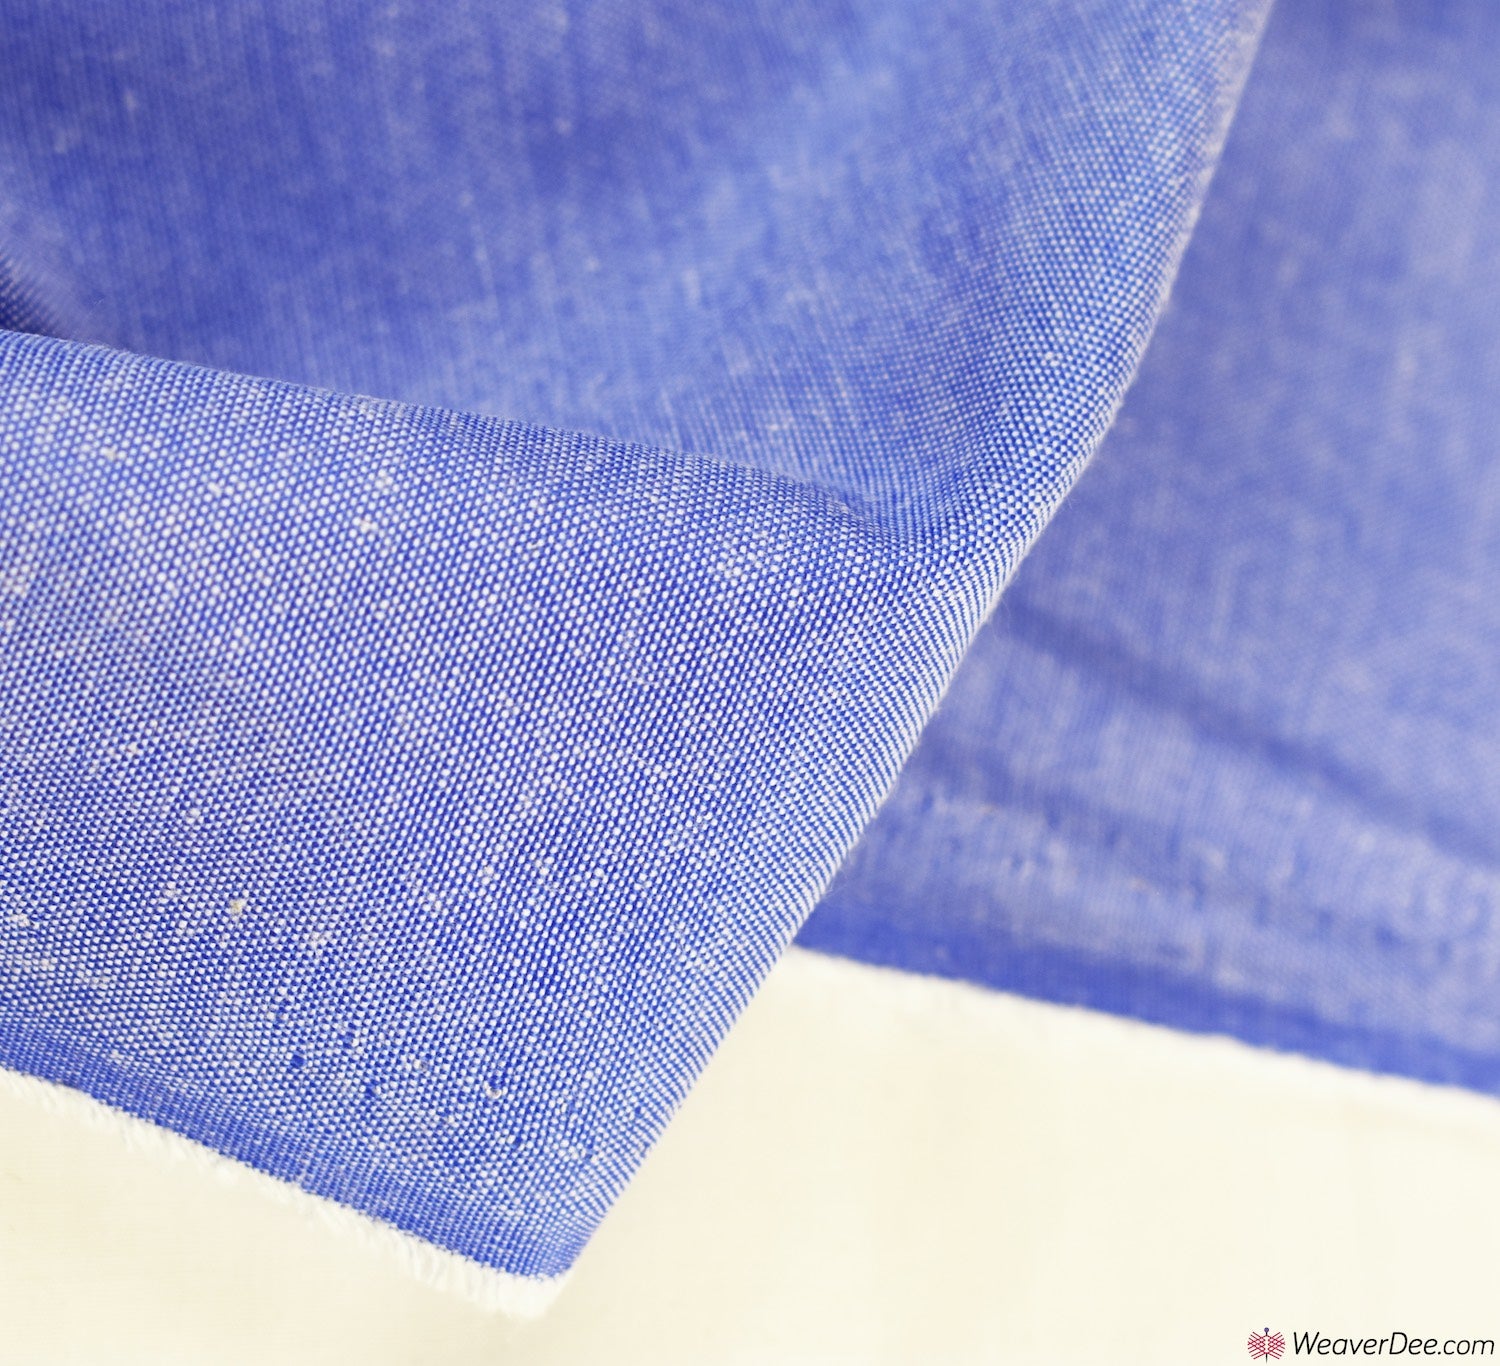 P/K Lifestyles Desmond Solid - Chambray 409376 Fabric Swatch – CoCo B.  Kitchen & Home